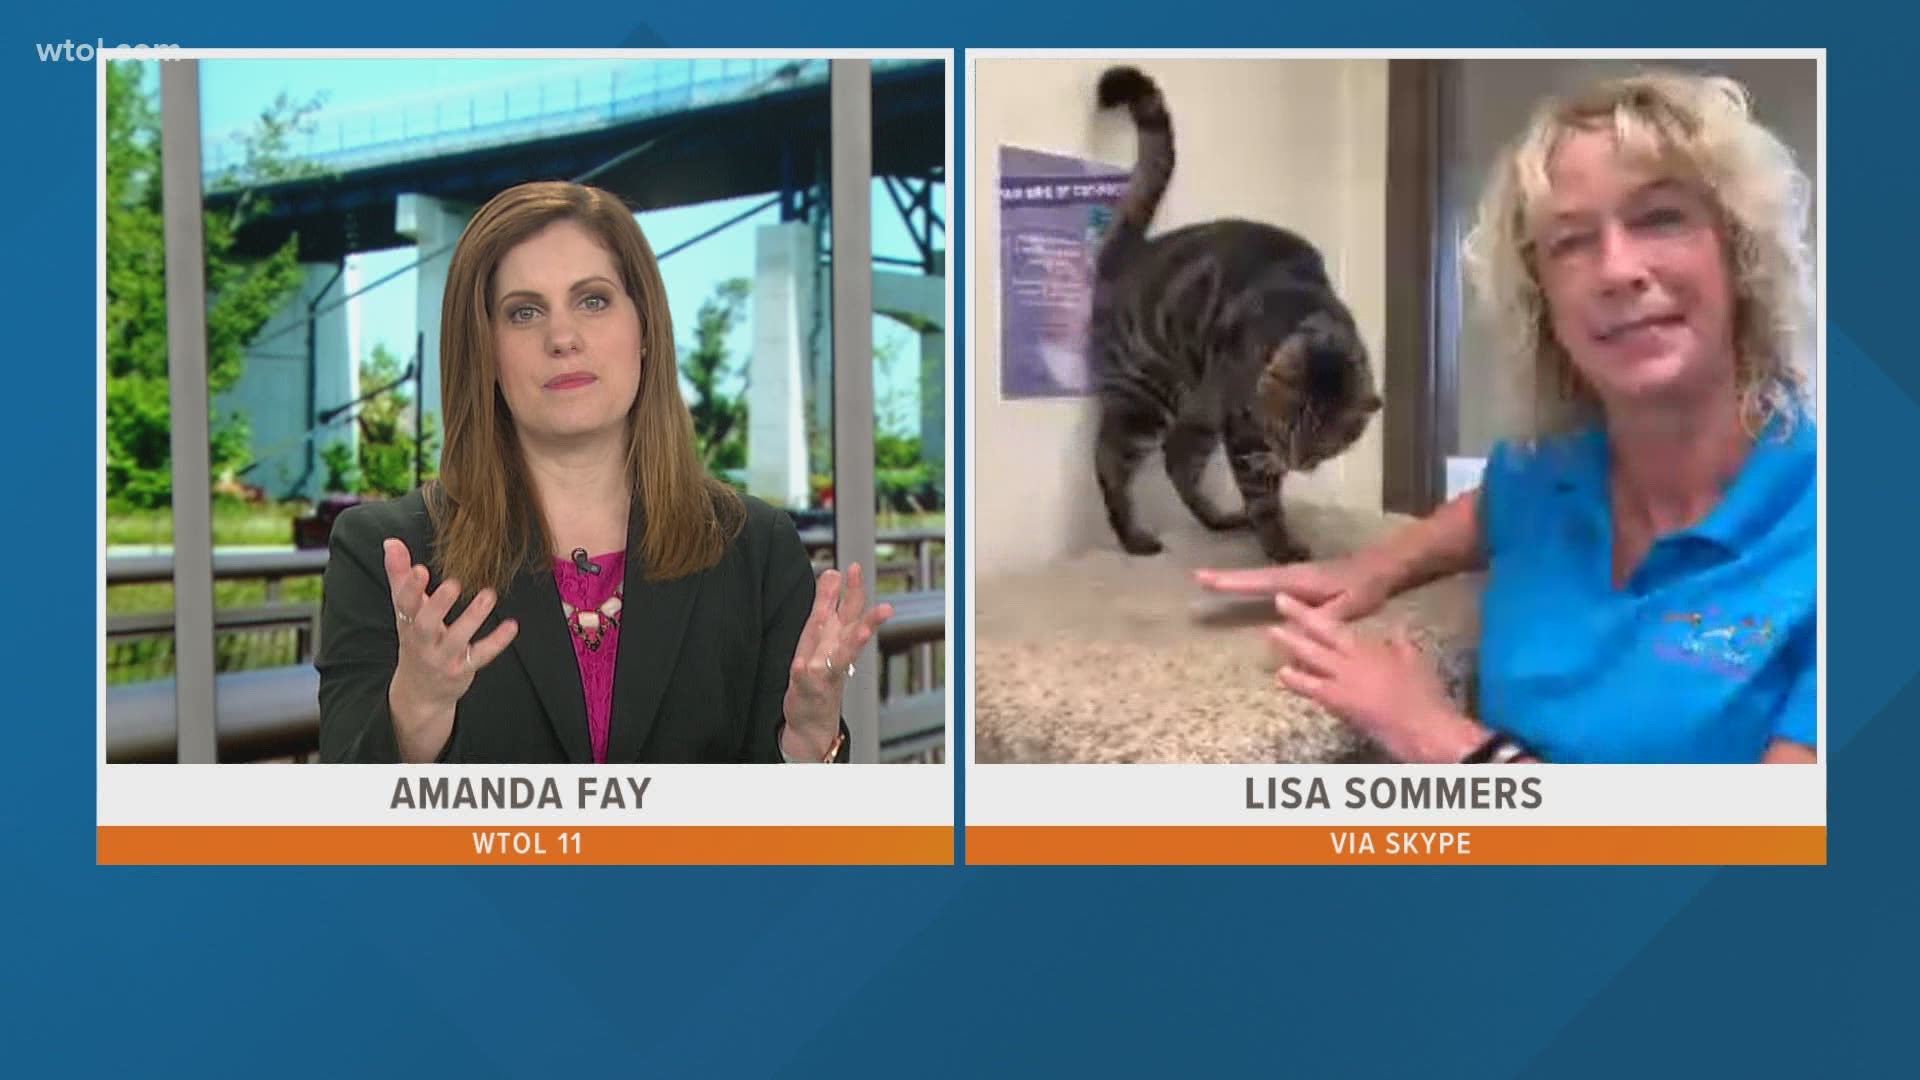 Losing a pet can be tragic. The Toledo Humane Society tries to prevent this by microchipping all their adoptable pets!